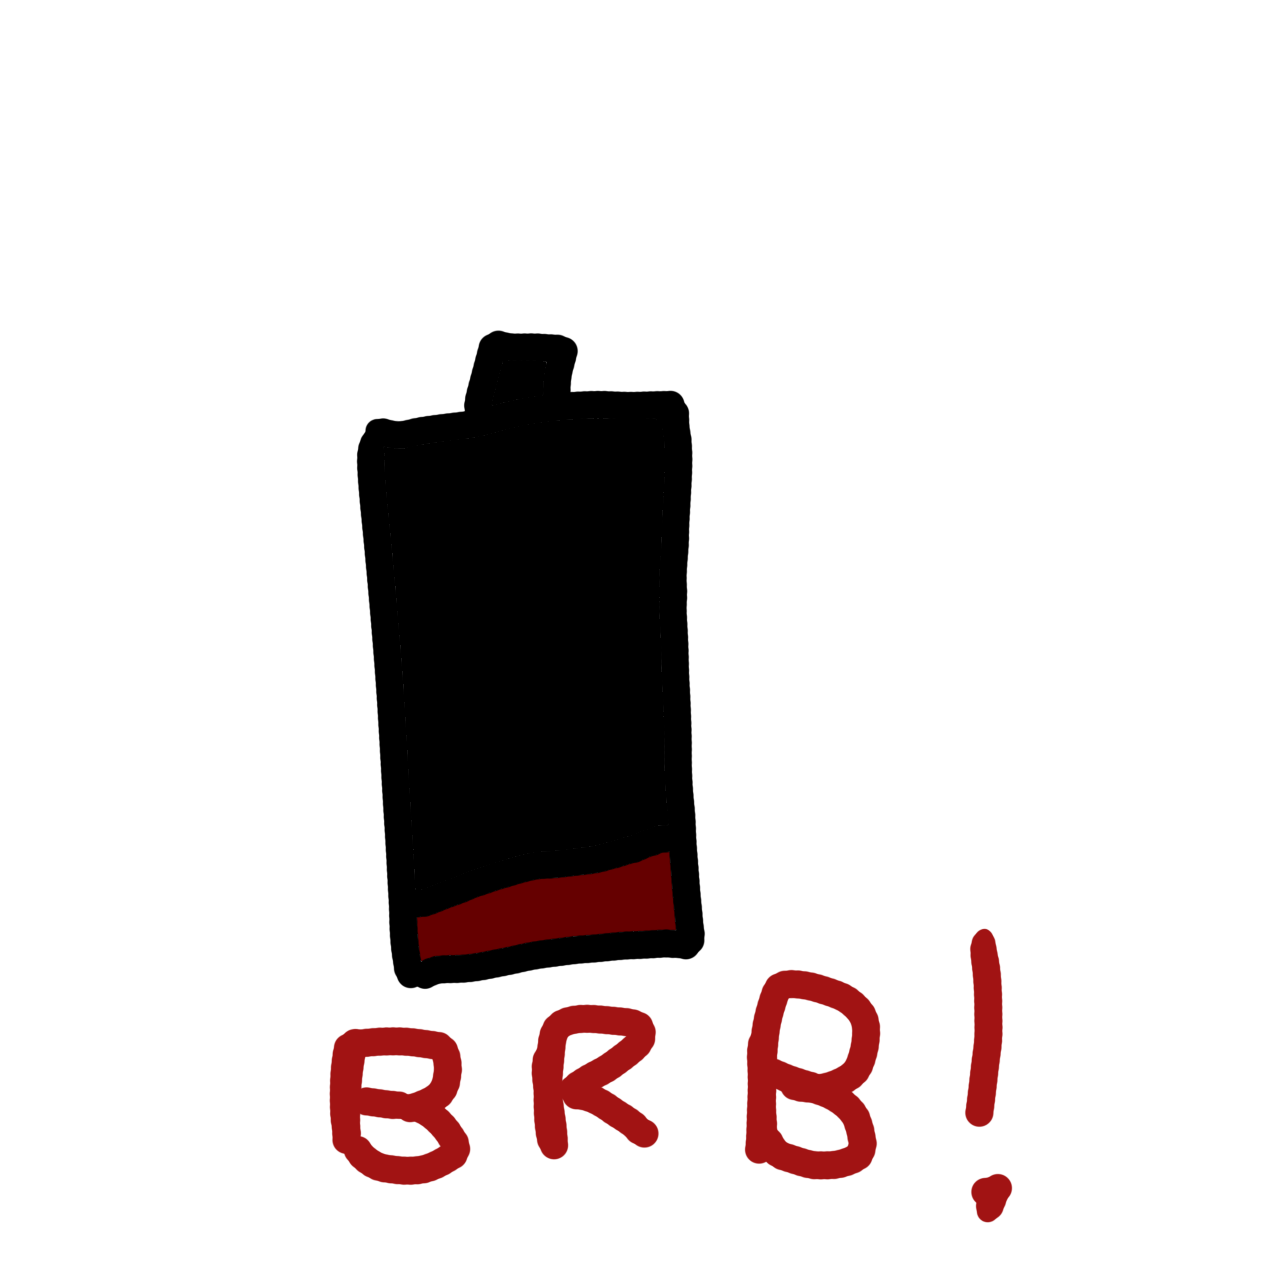 an icon of an almost empty phone battery meter with the acronym “BRB!” below it.